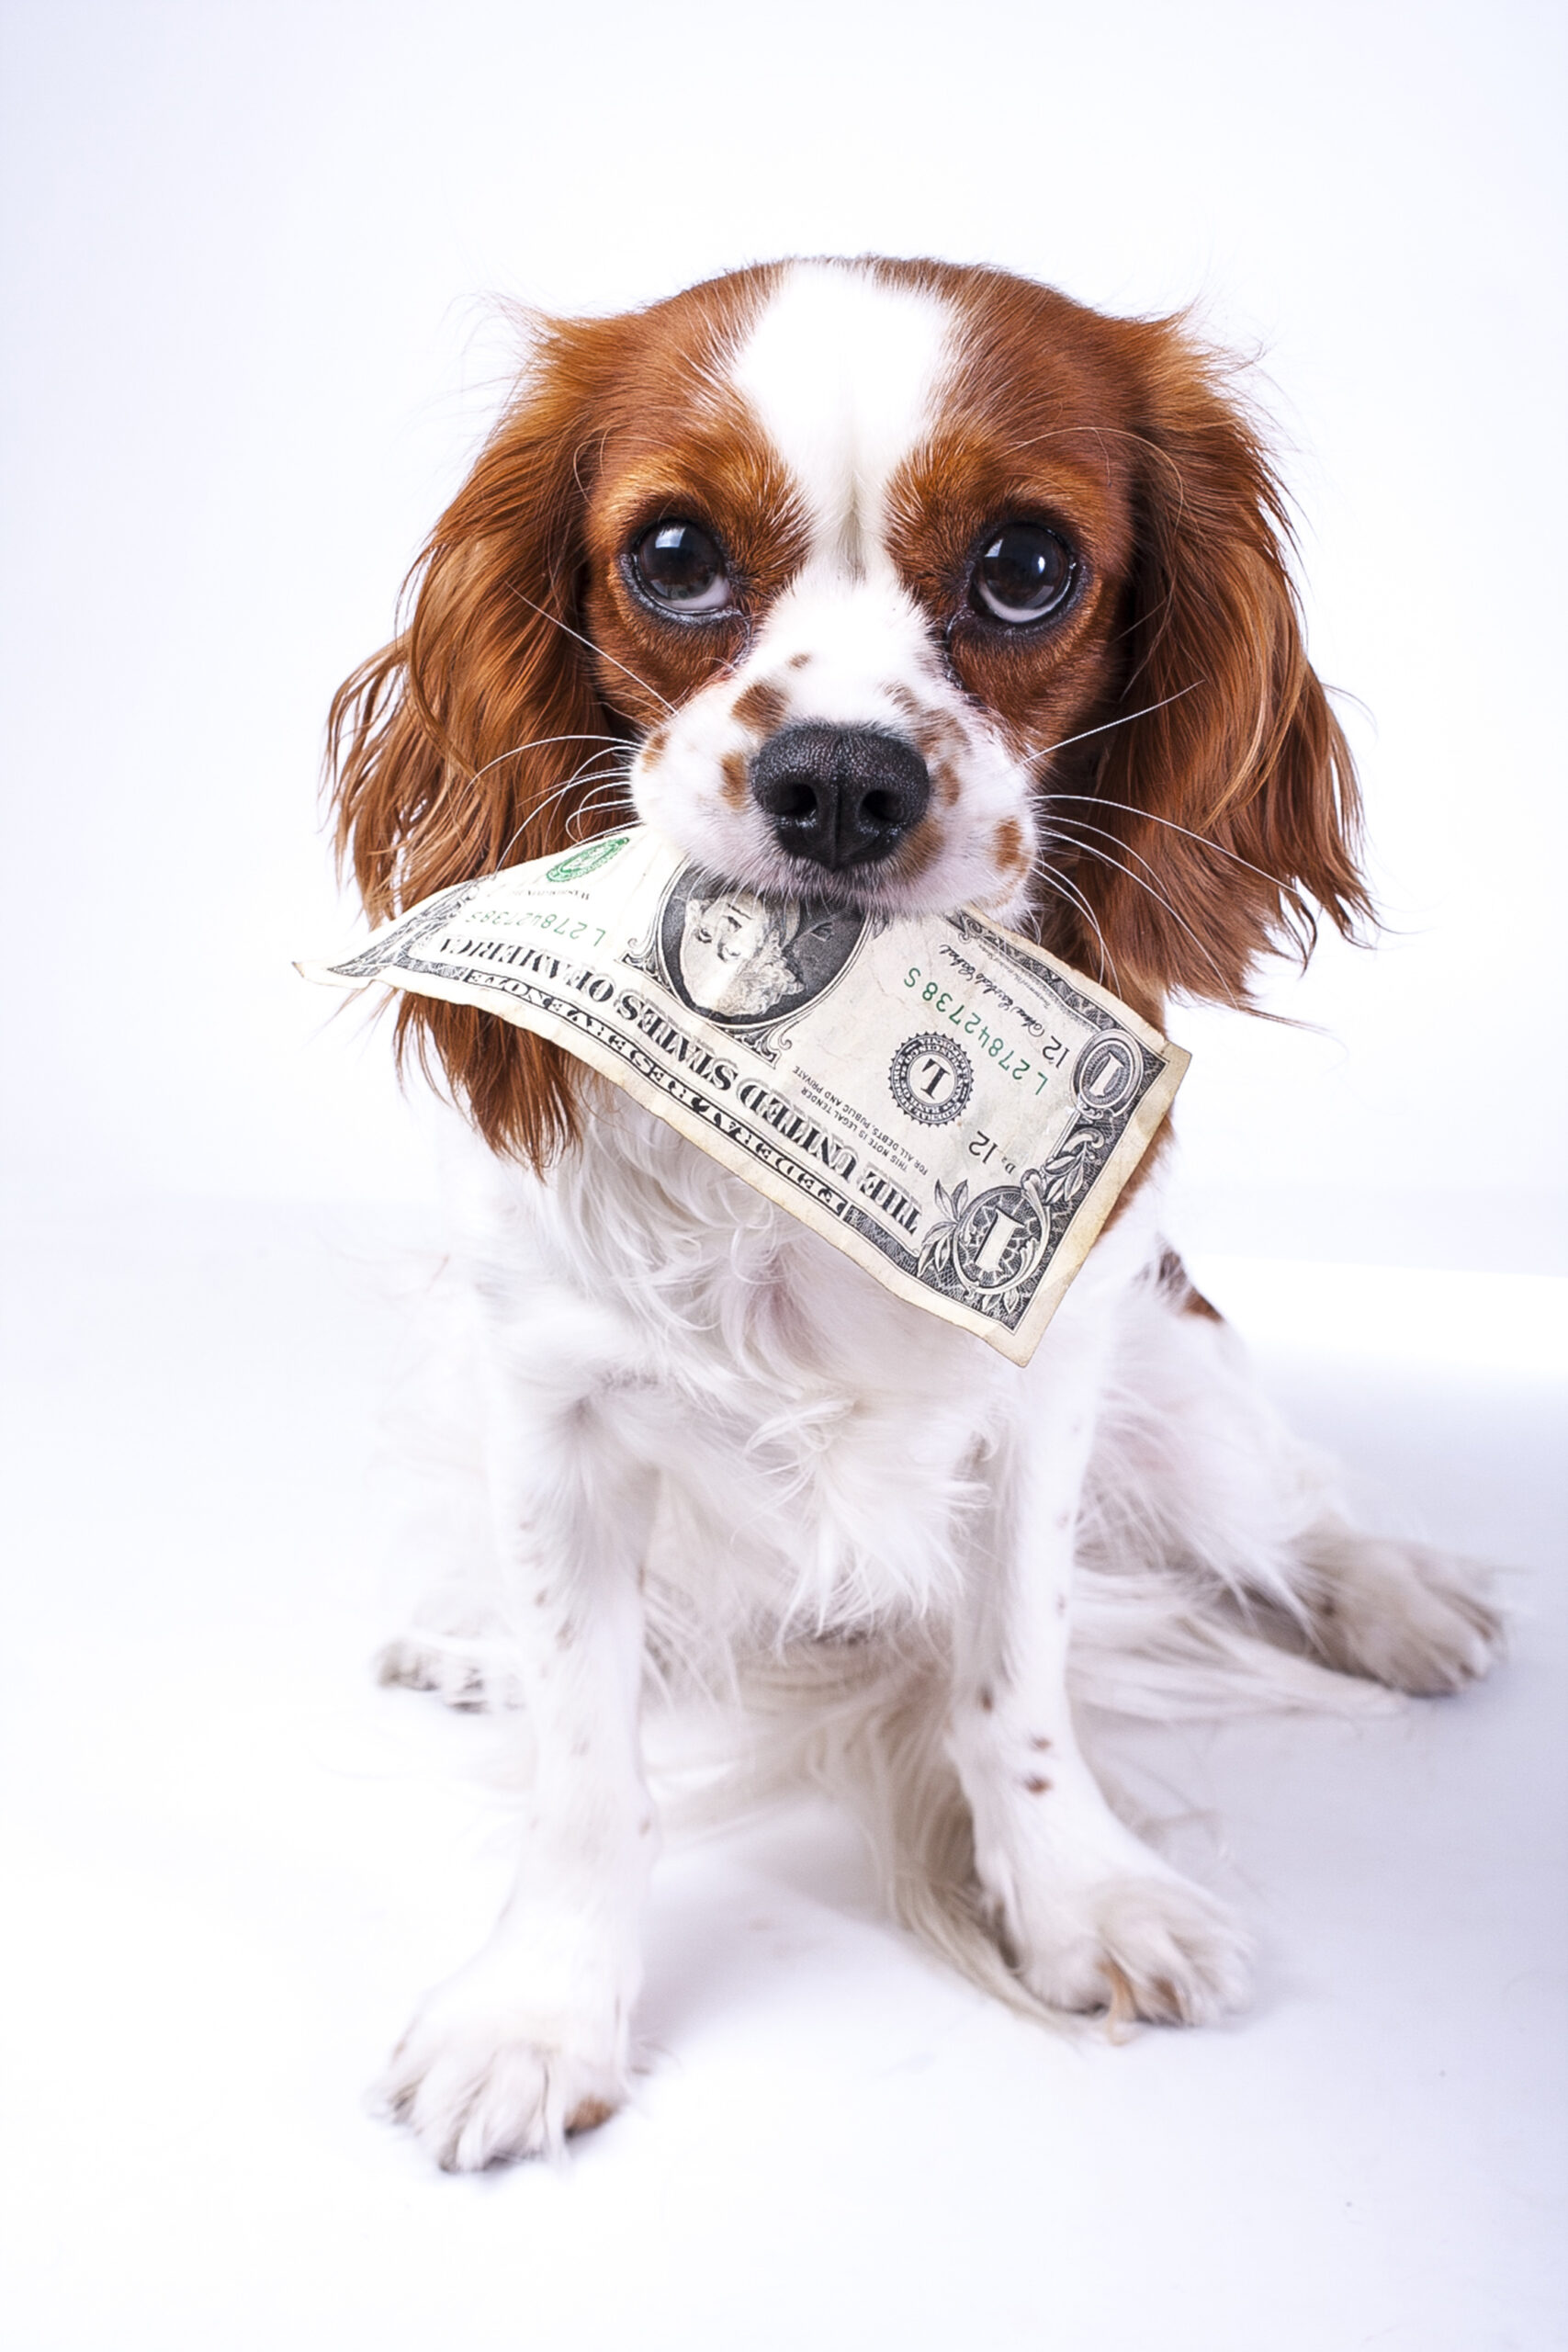 Tipping in the Pet Service Industry - The Savvy Sitter